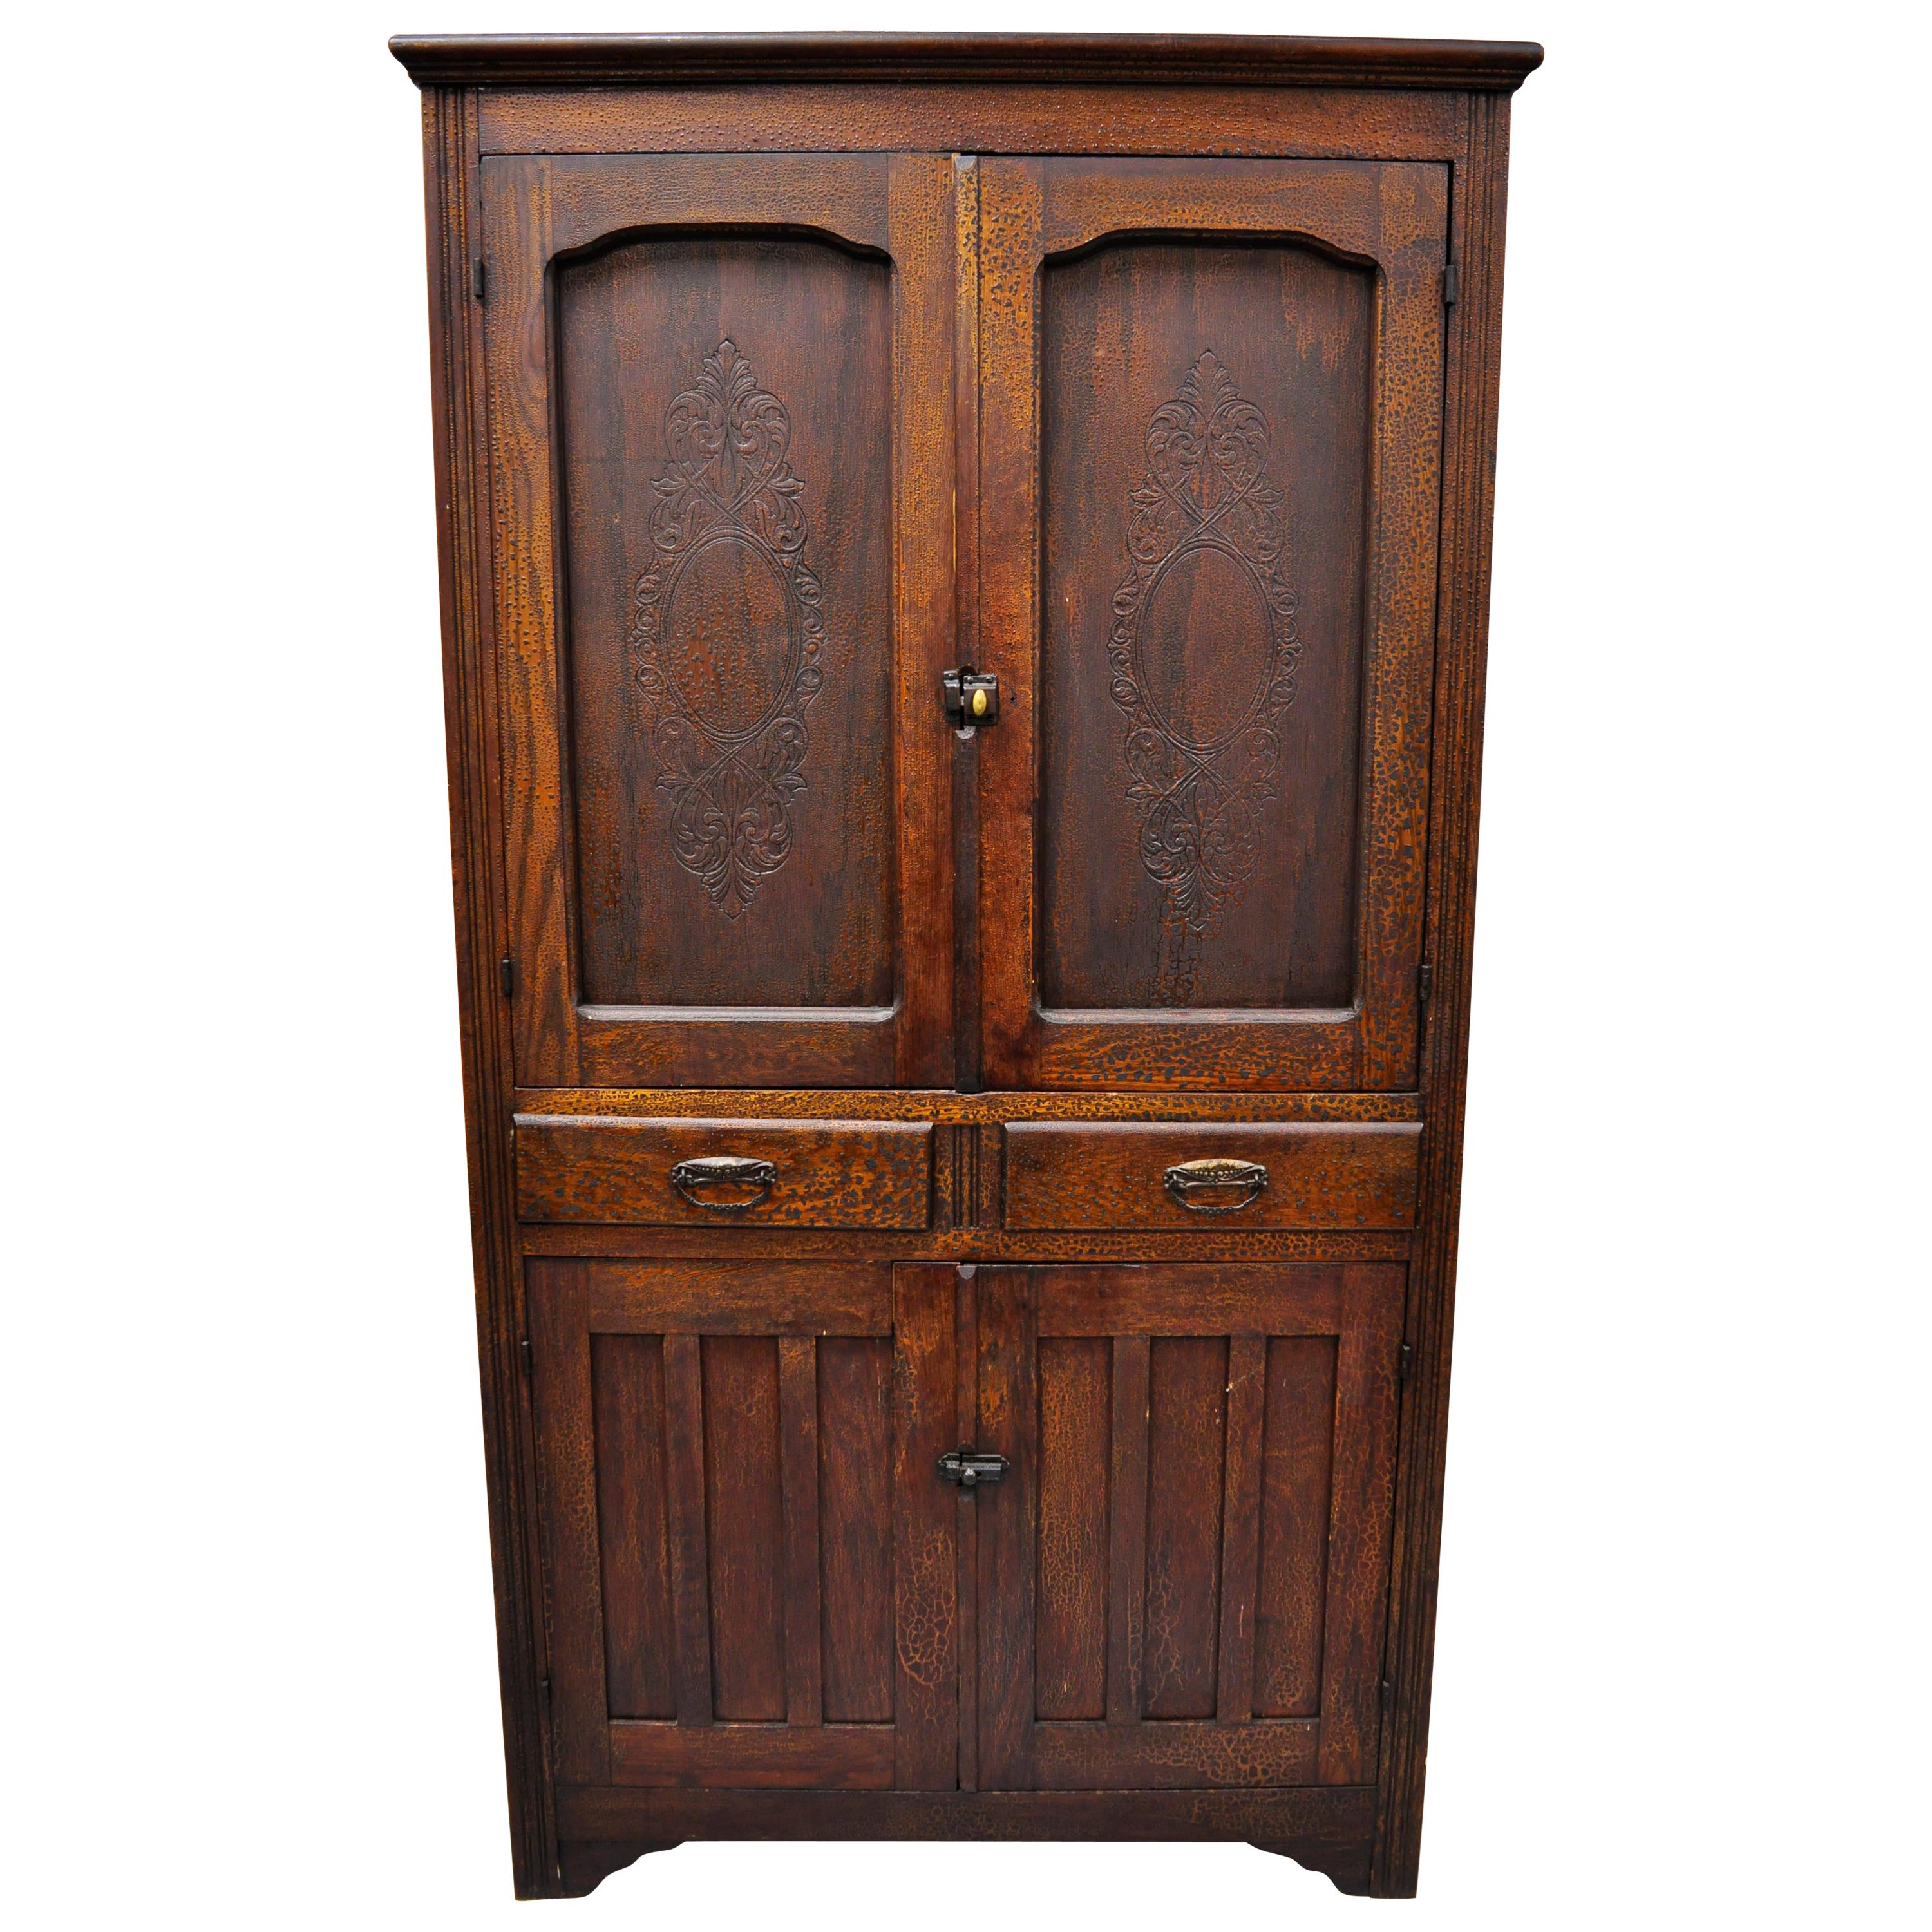 Antique Pine Wood Victorian Cupboard Cabinet Hutch with Alligatored Finish